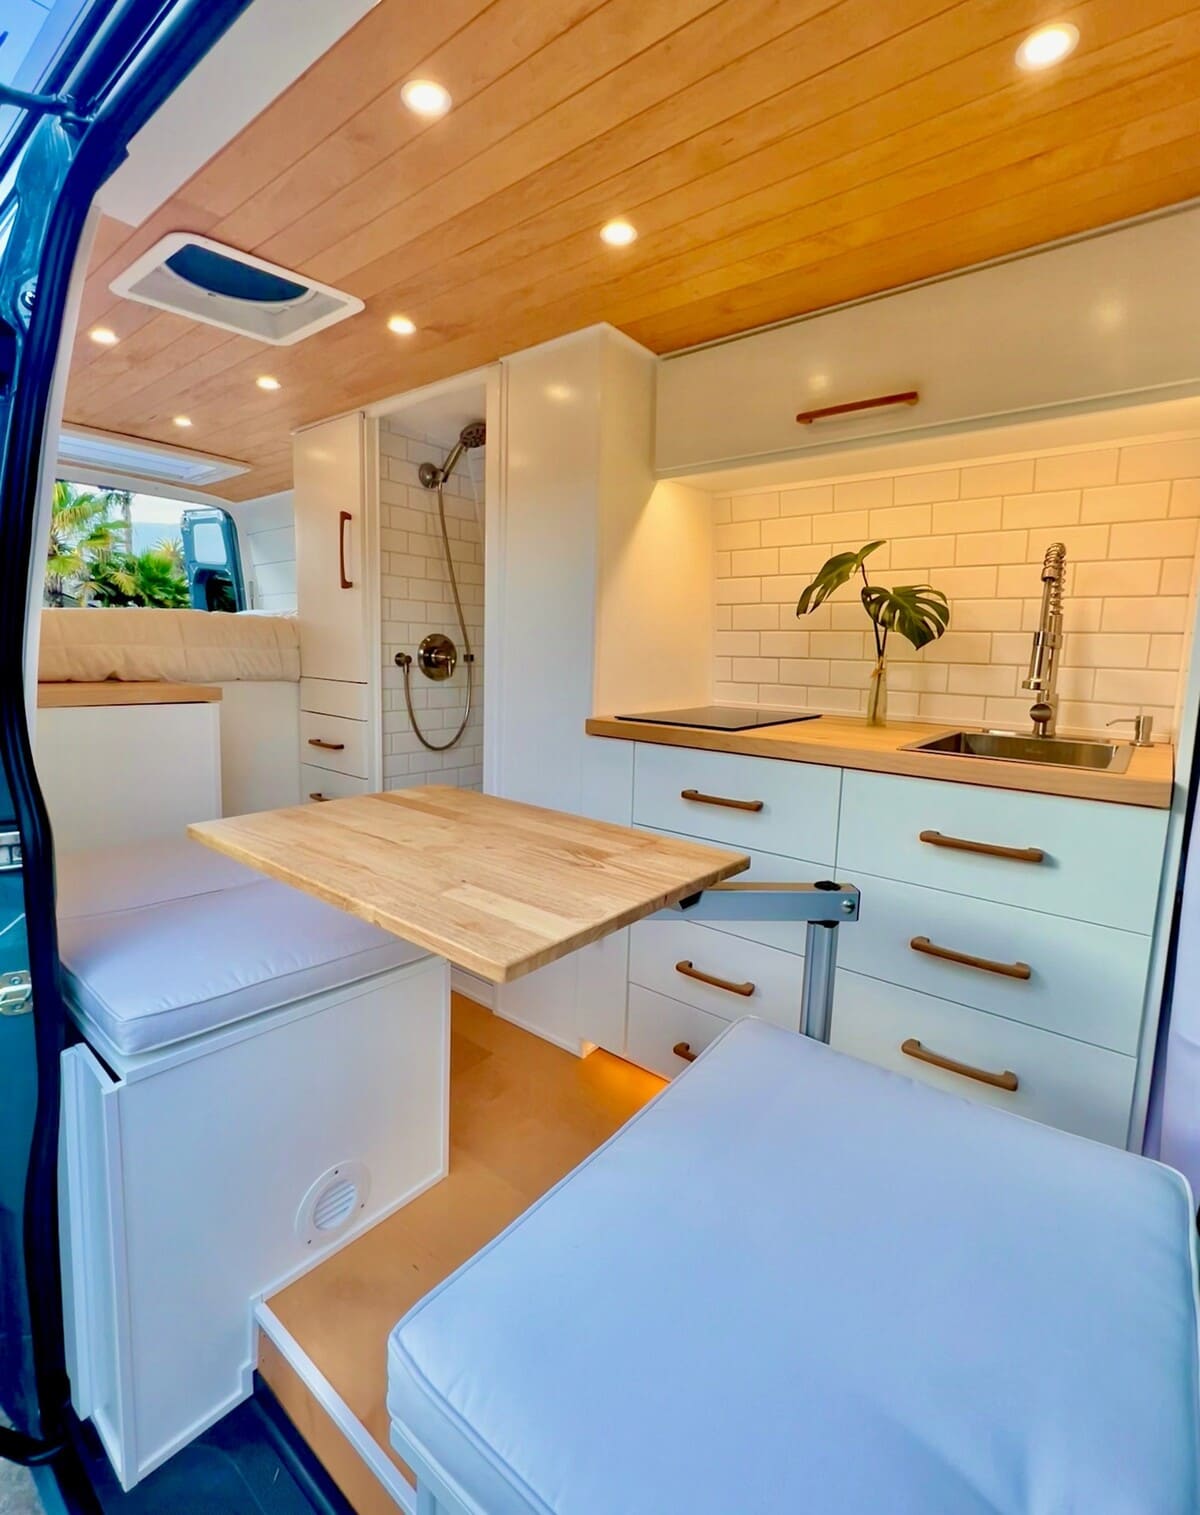 This Sprinter Campervan Conversion Could Be Your Luxury Home Away From